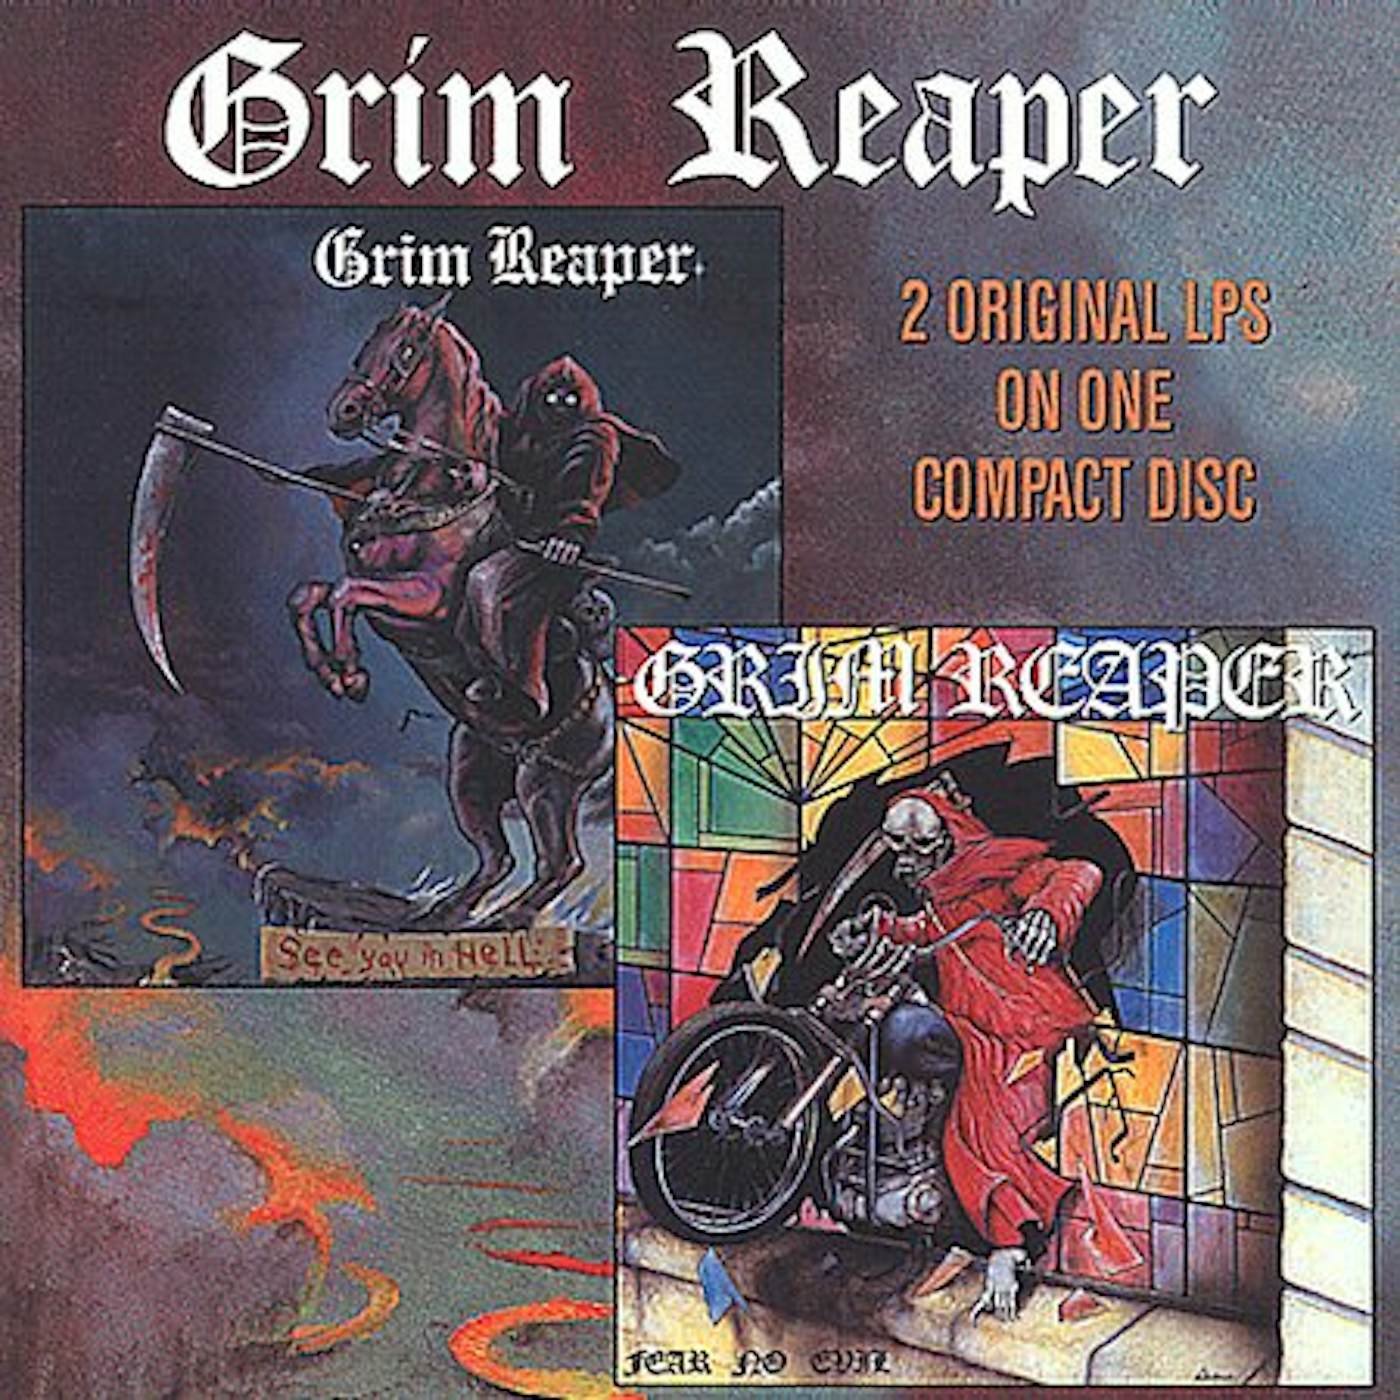 Grim Reaper SEE YOU IN HELL / FEAR NO EVIL CD